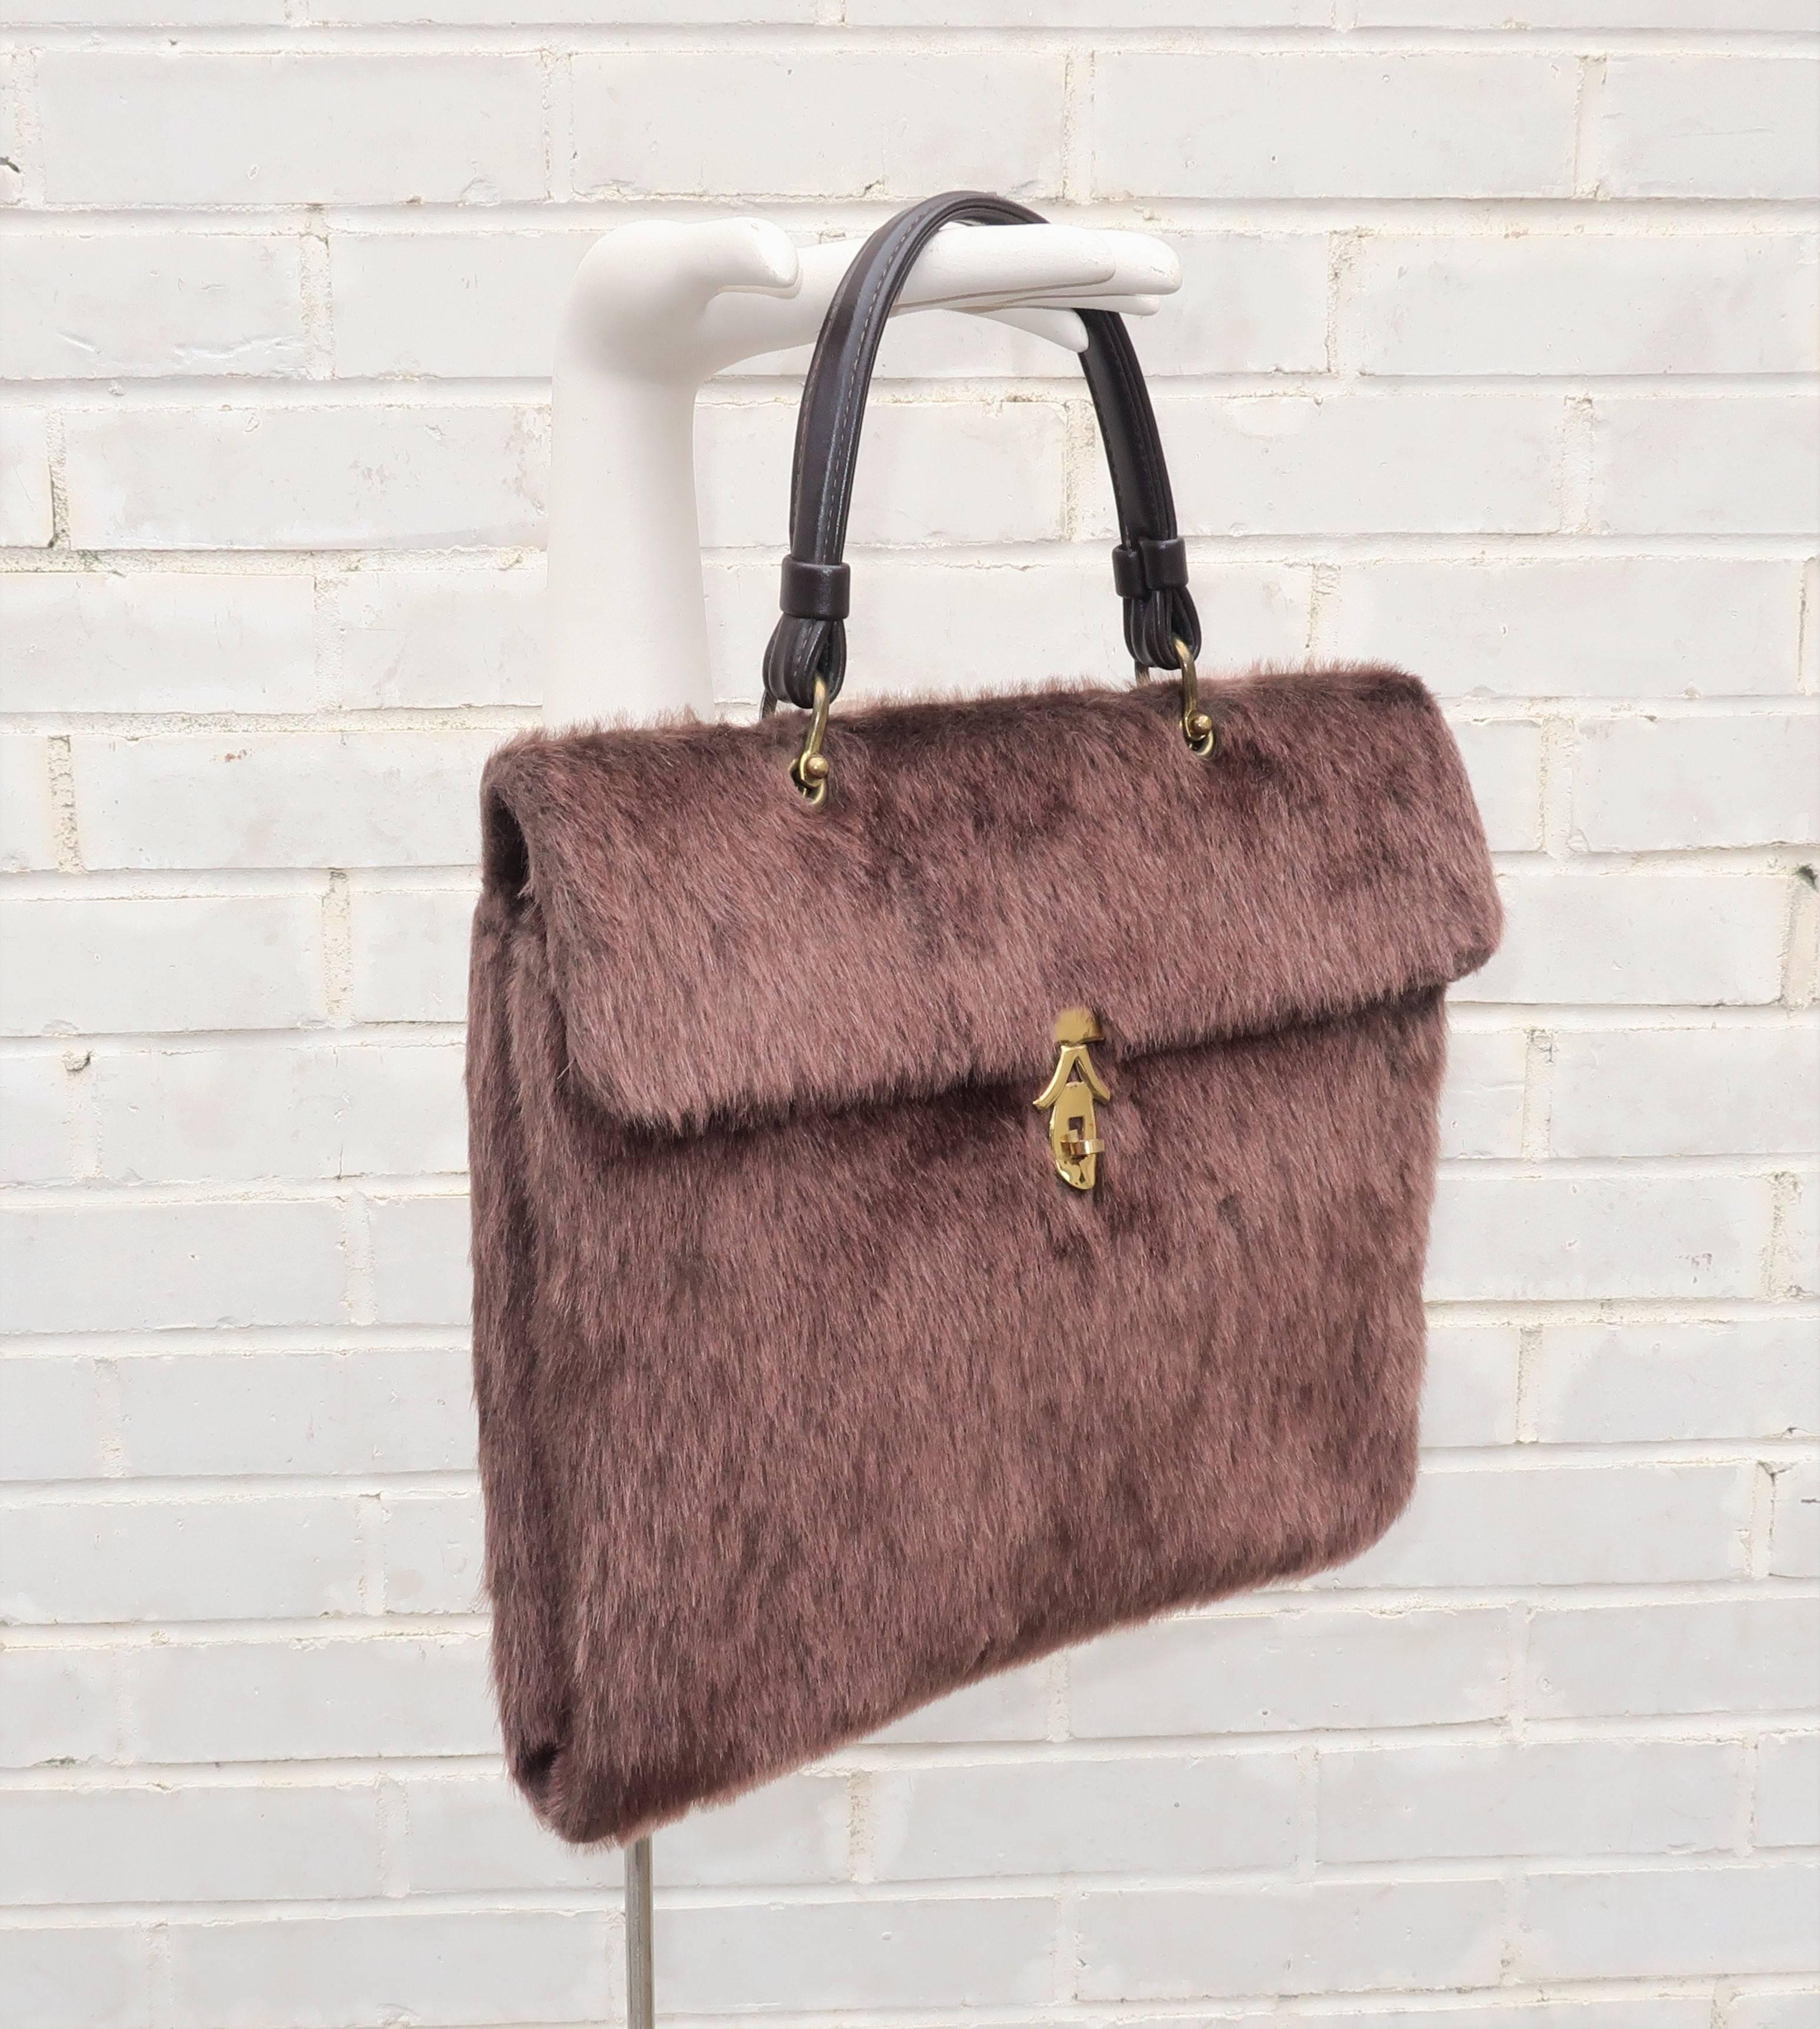 Faux fabulous with a wooly mammoth twist!  This fun brown faux fur handbag is a roomy envelope shape with a flap front turn lock closure.  The handle is attached with brass hardware and the interior is lined in vinyl with an open pocket and zippered